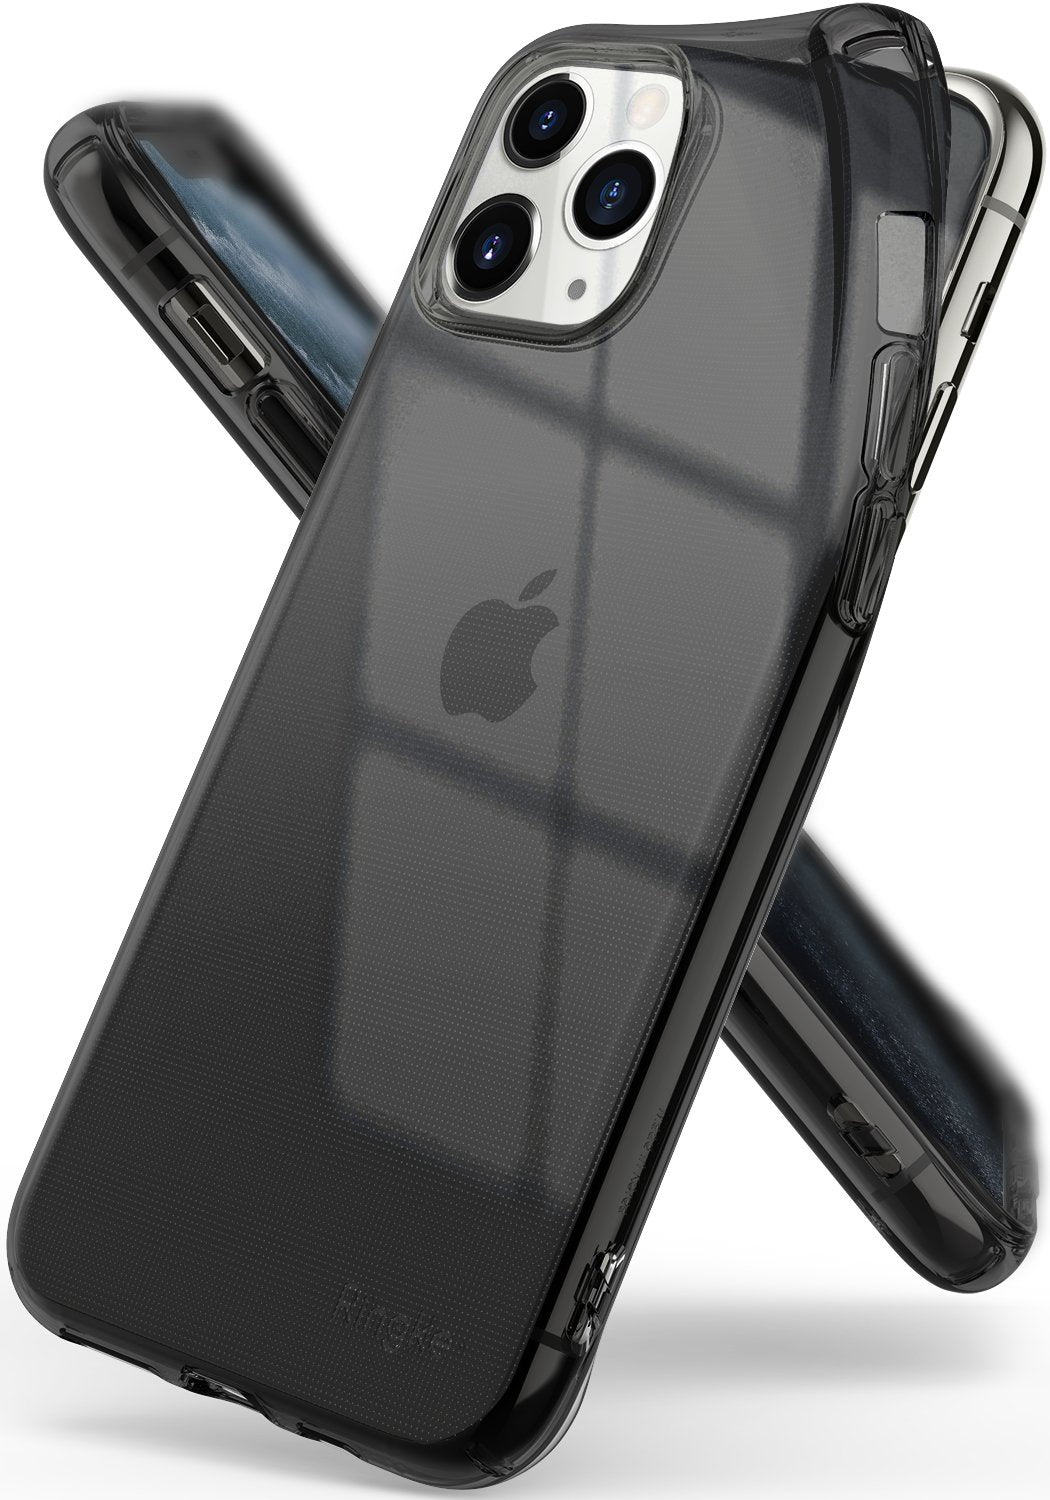 Iphone 11 Pro Max Case Ringke Air Ringke Official Store